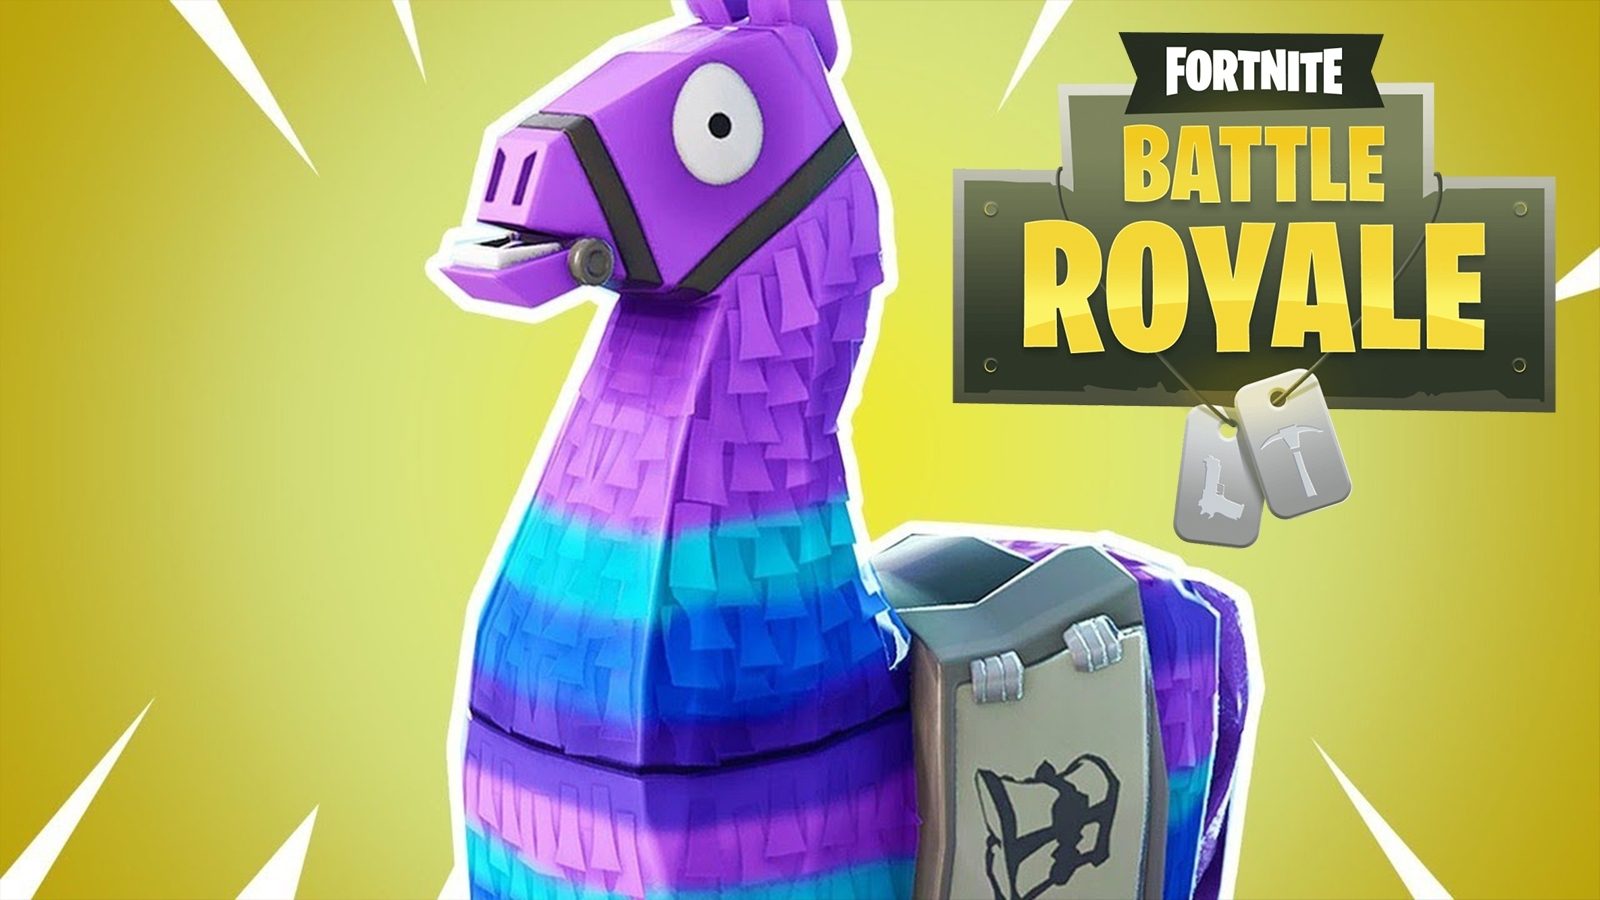 A new Llama themed fireworks event has been found in Fortnite